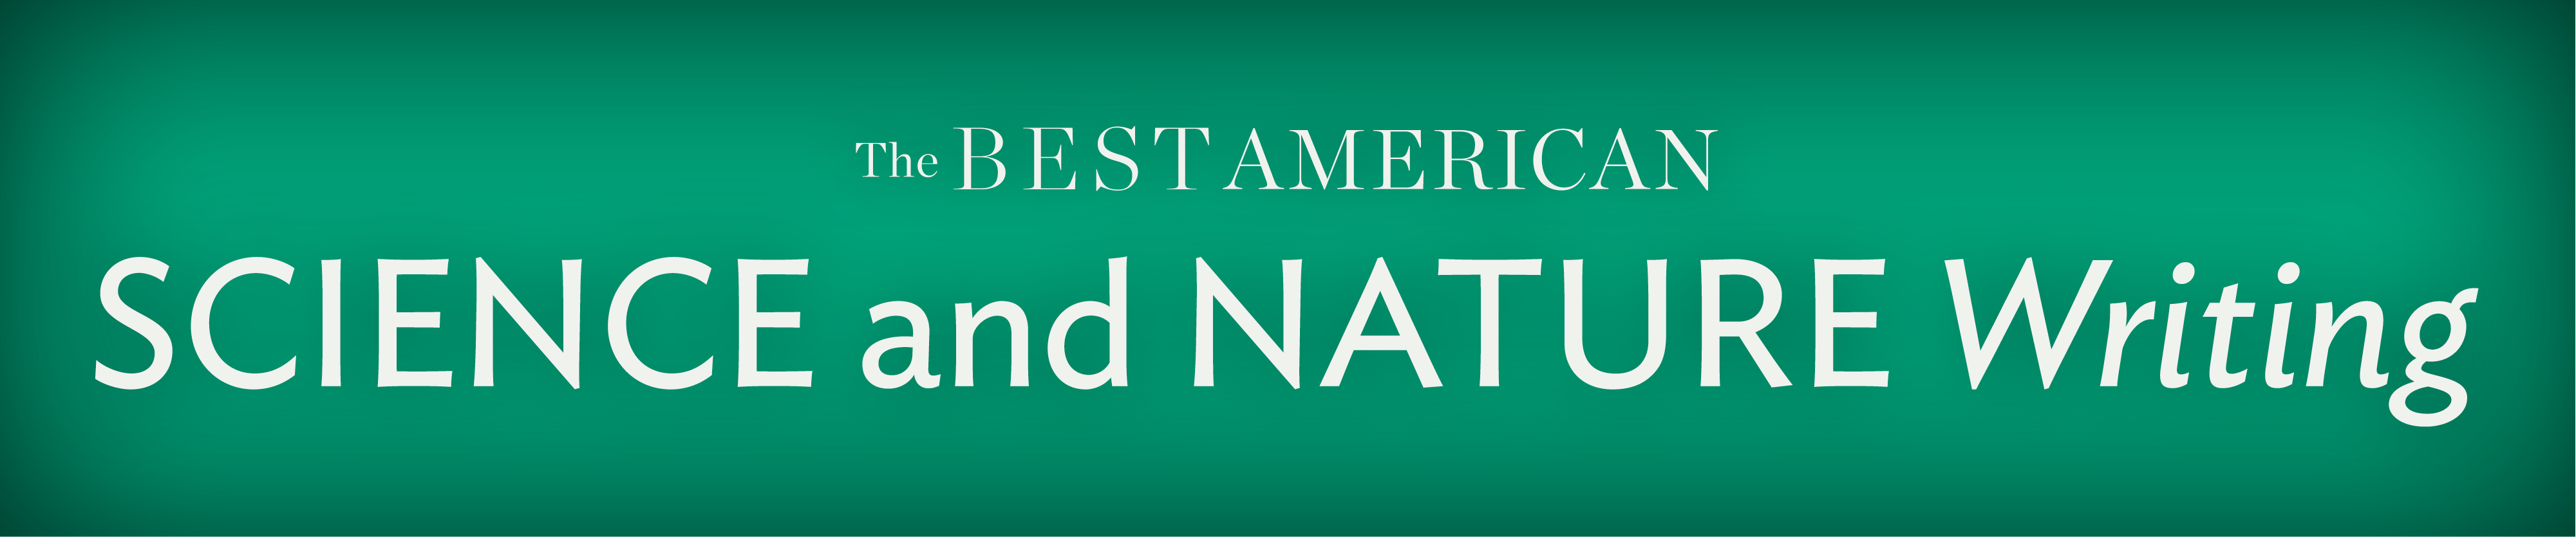 best american science and nature